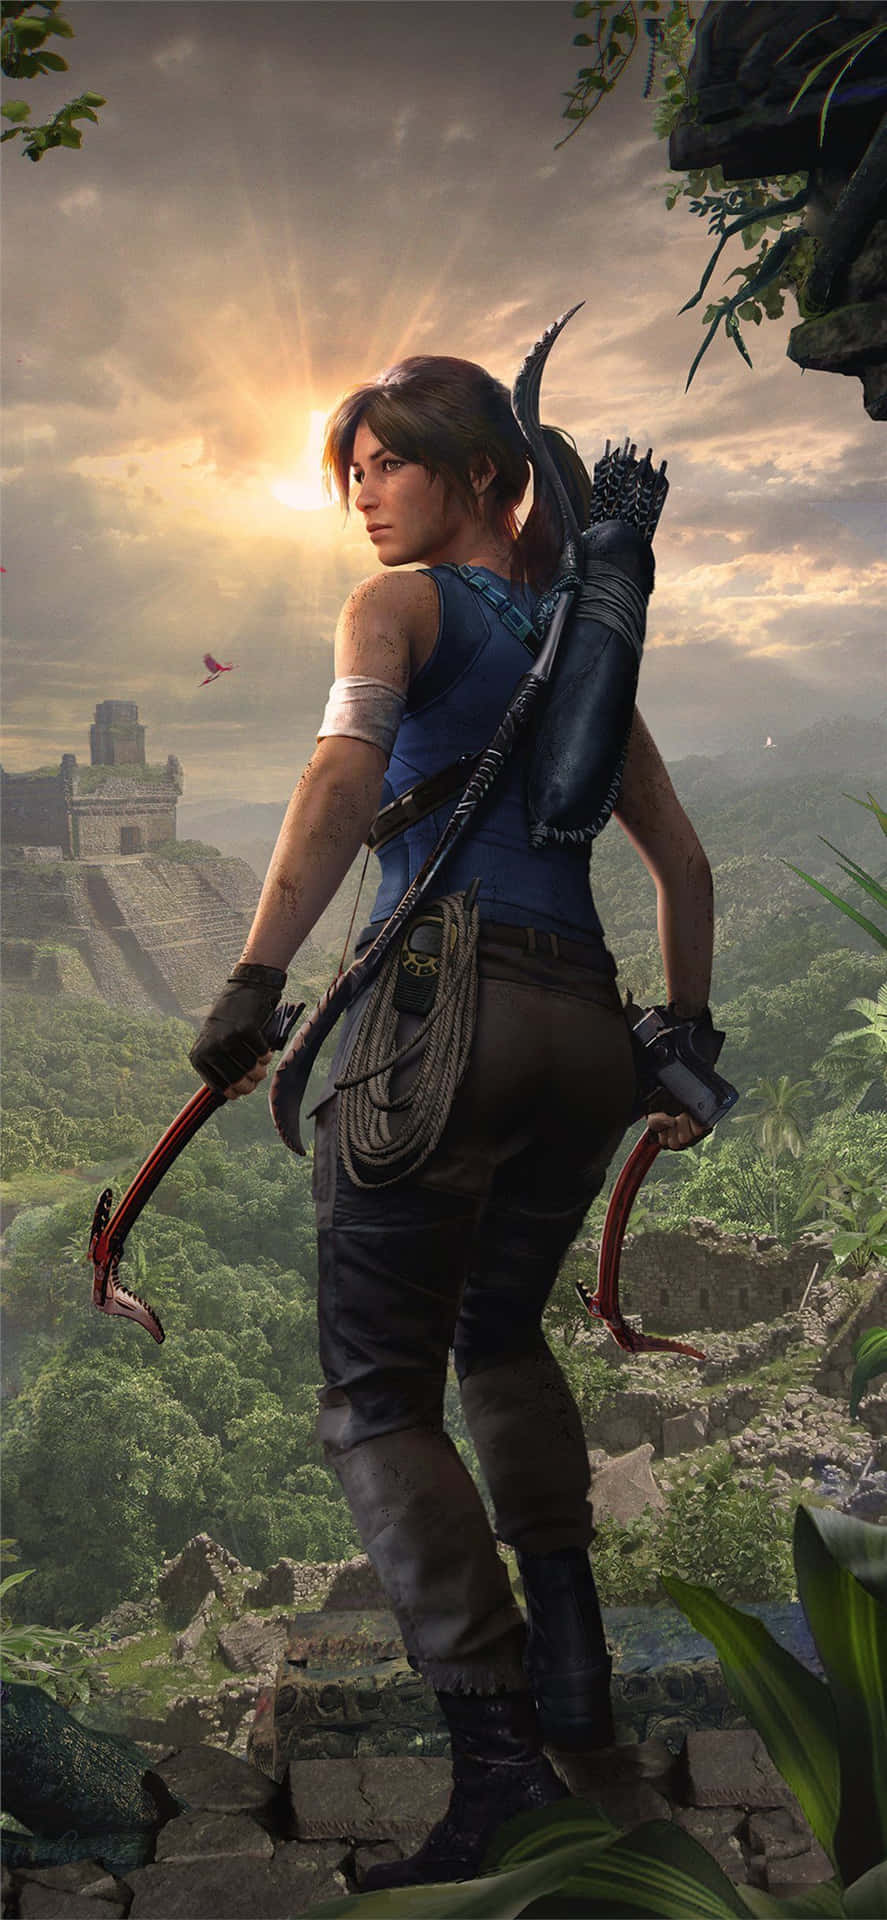 The Tomb Raider Is Standing In A Forest Background